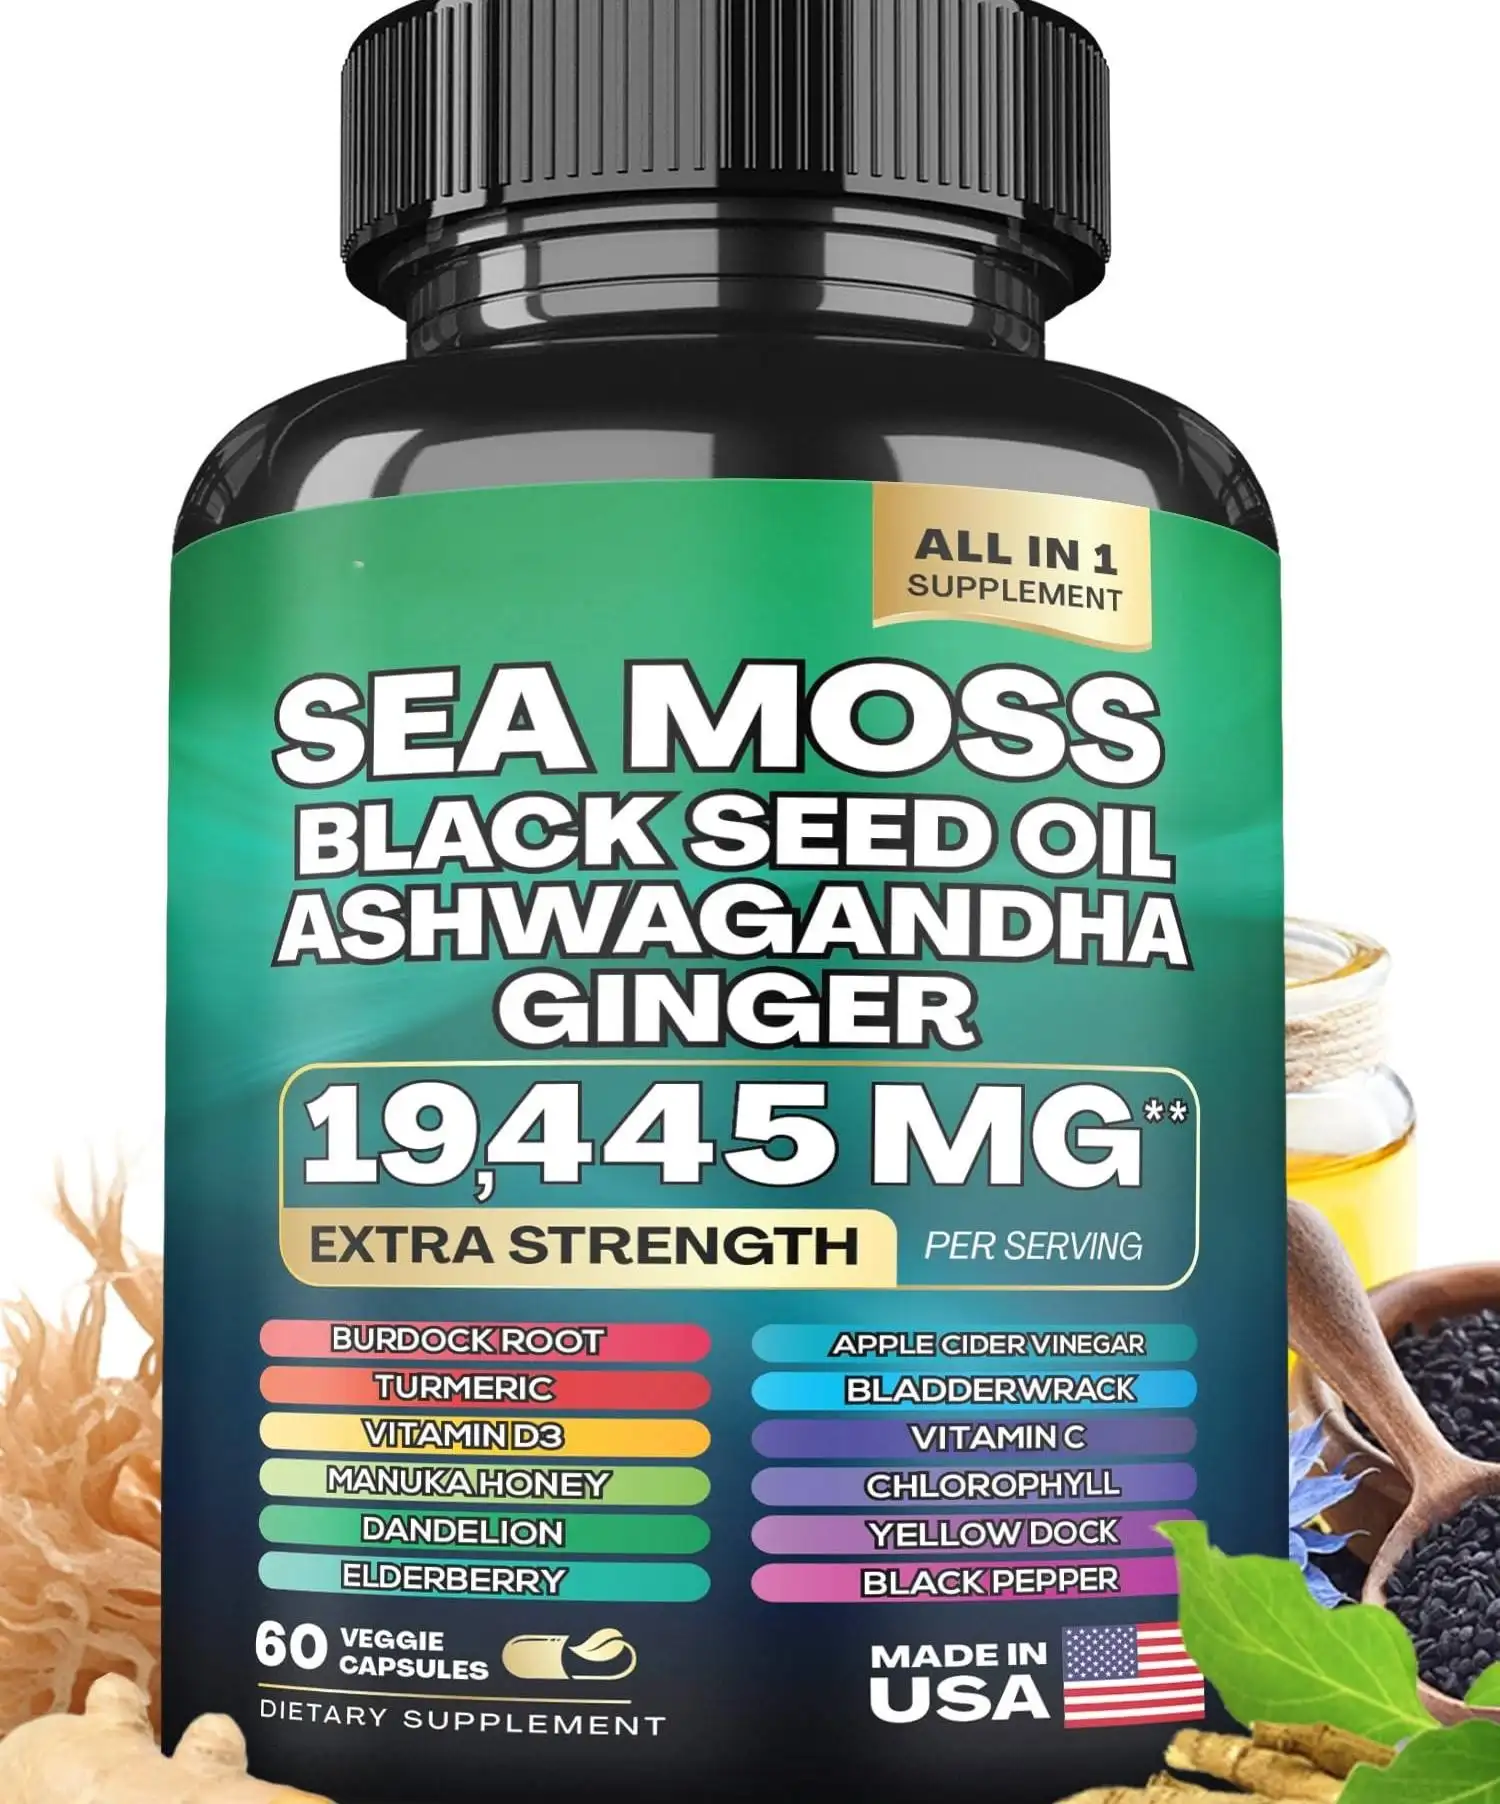 16 and 1 Supplement Sea moss Capsule Black Seed Oil Ashwagandha Turmeric Burdock Complex Sea Moss Pill For Immune System